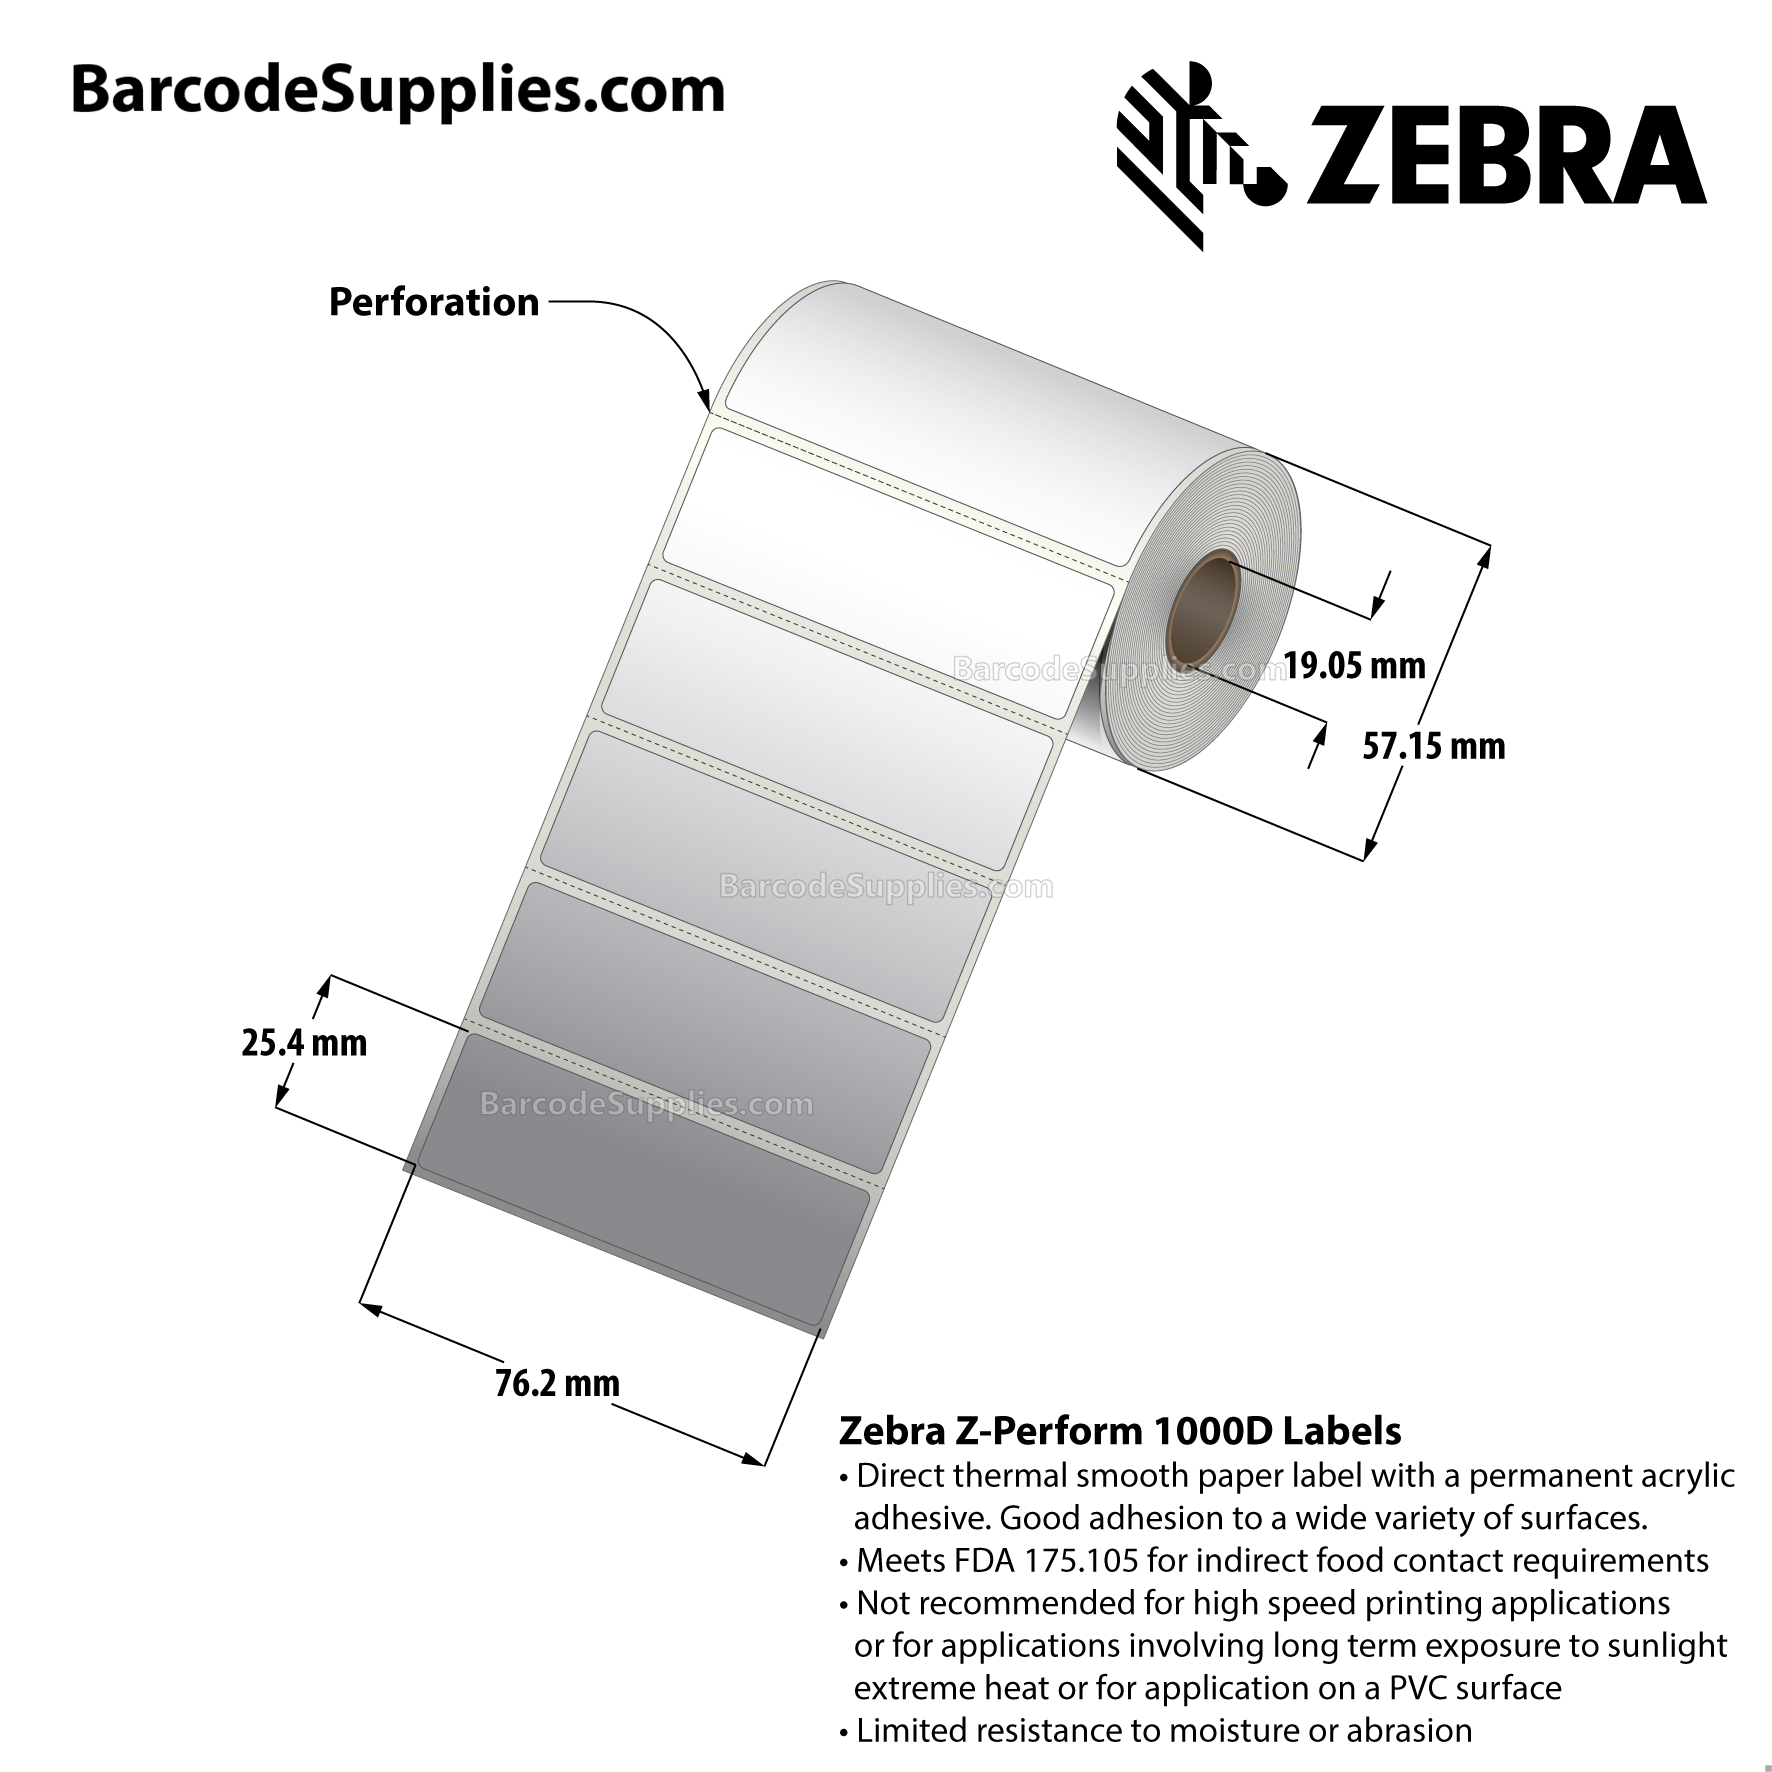 3 x 1 Direct Thermal White Z-Perform 1000D Labels With Permanent Adhesive - Perforated - 430 Labels Per Roll - Carton Of 36 Rolls - 15480 Labels Total - MPN: 10026369